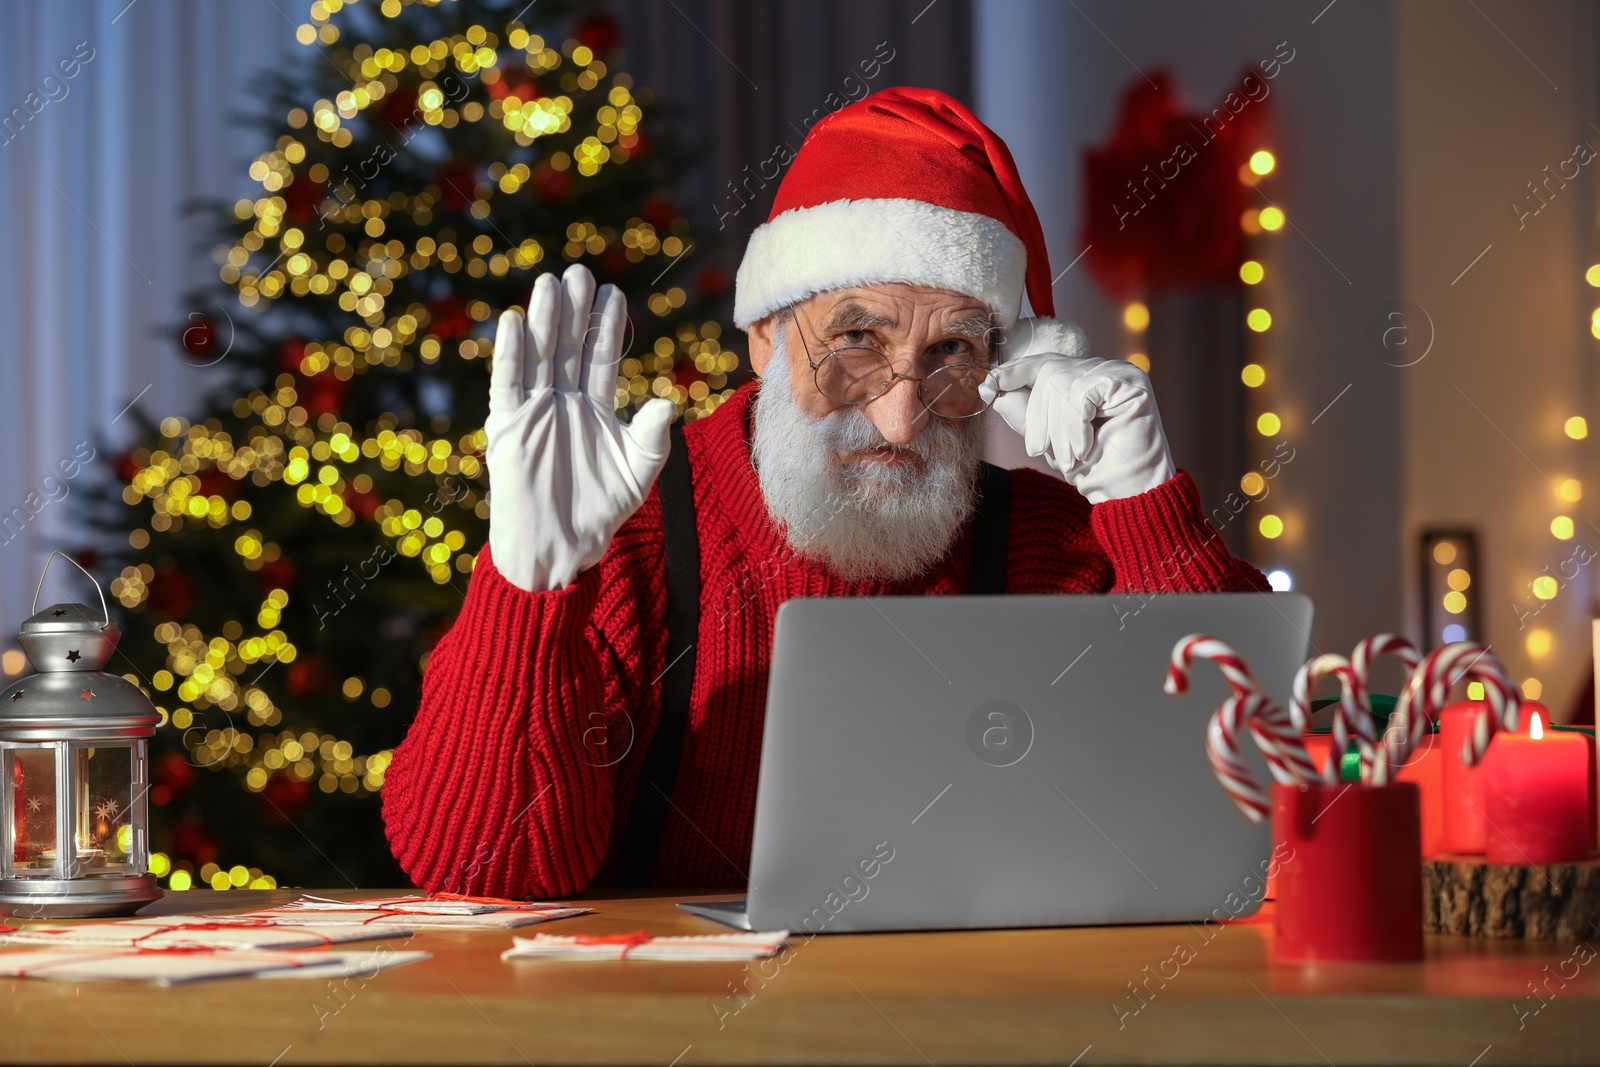 Photo of Santa Claus using laptop and waving hello at his workplace in room with Christmas tree